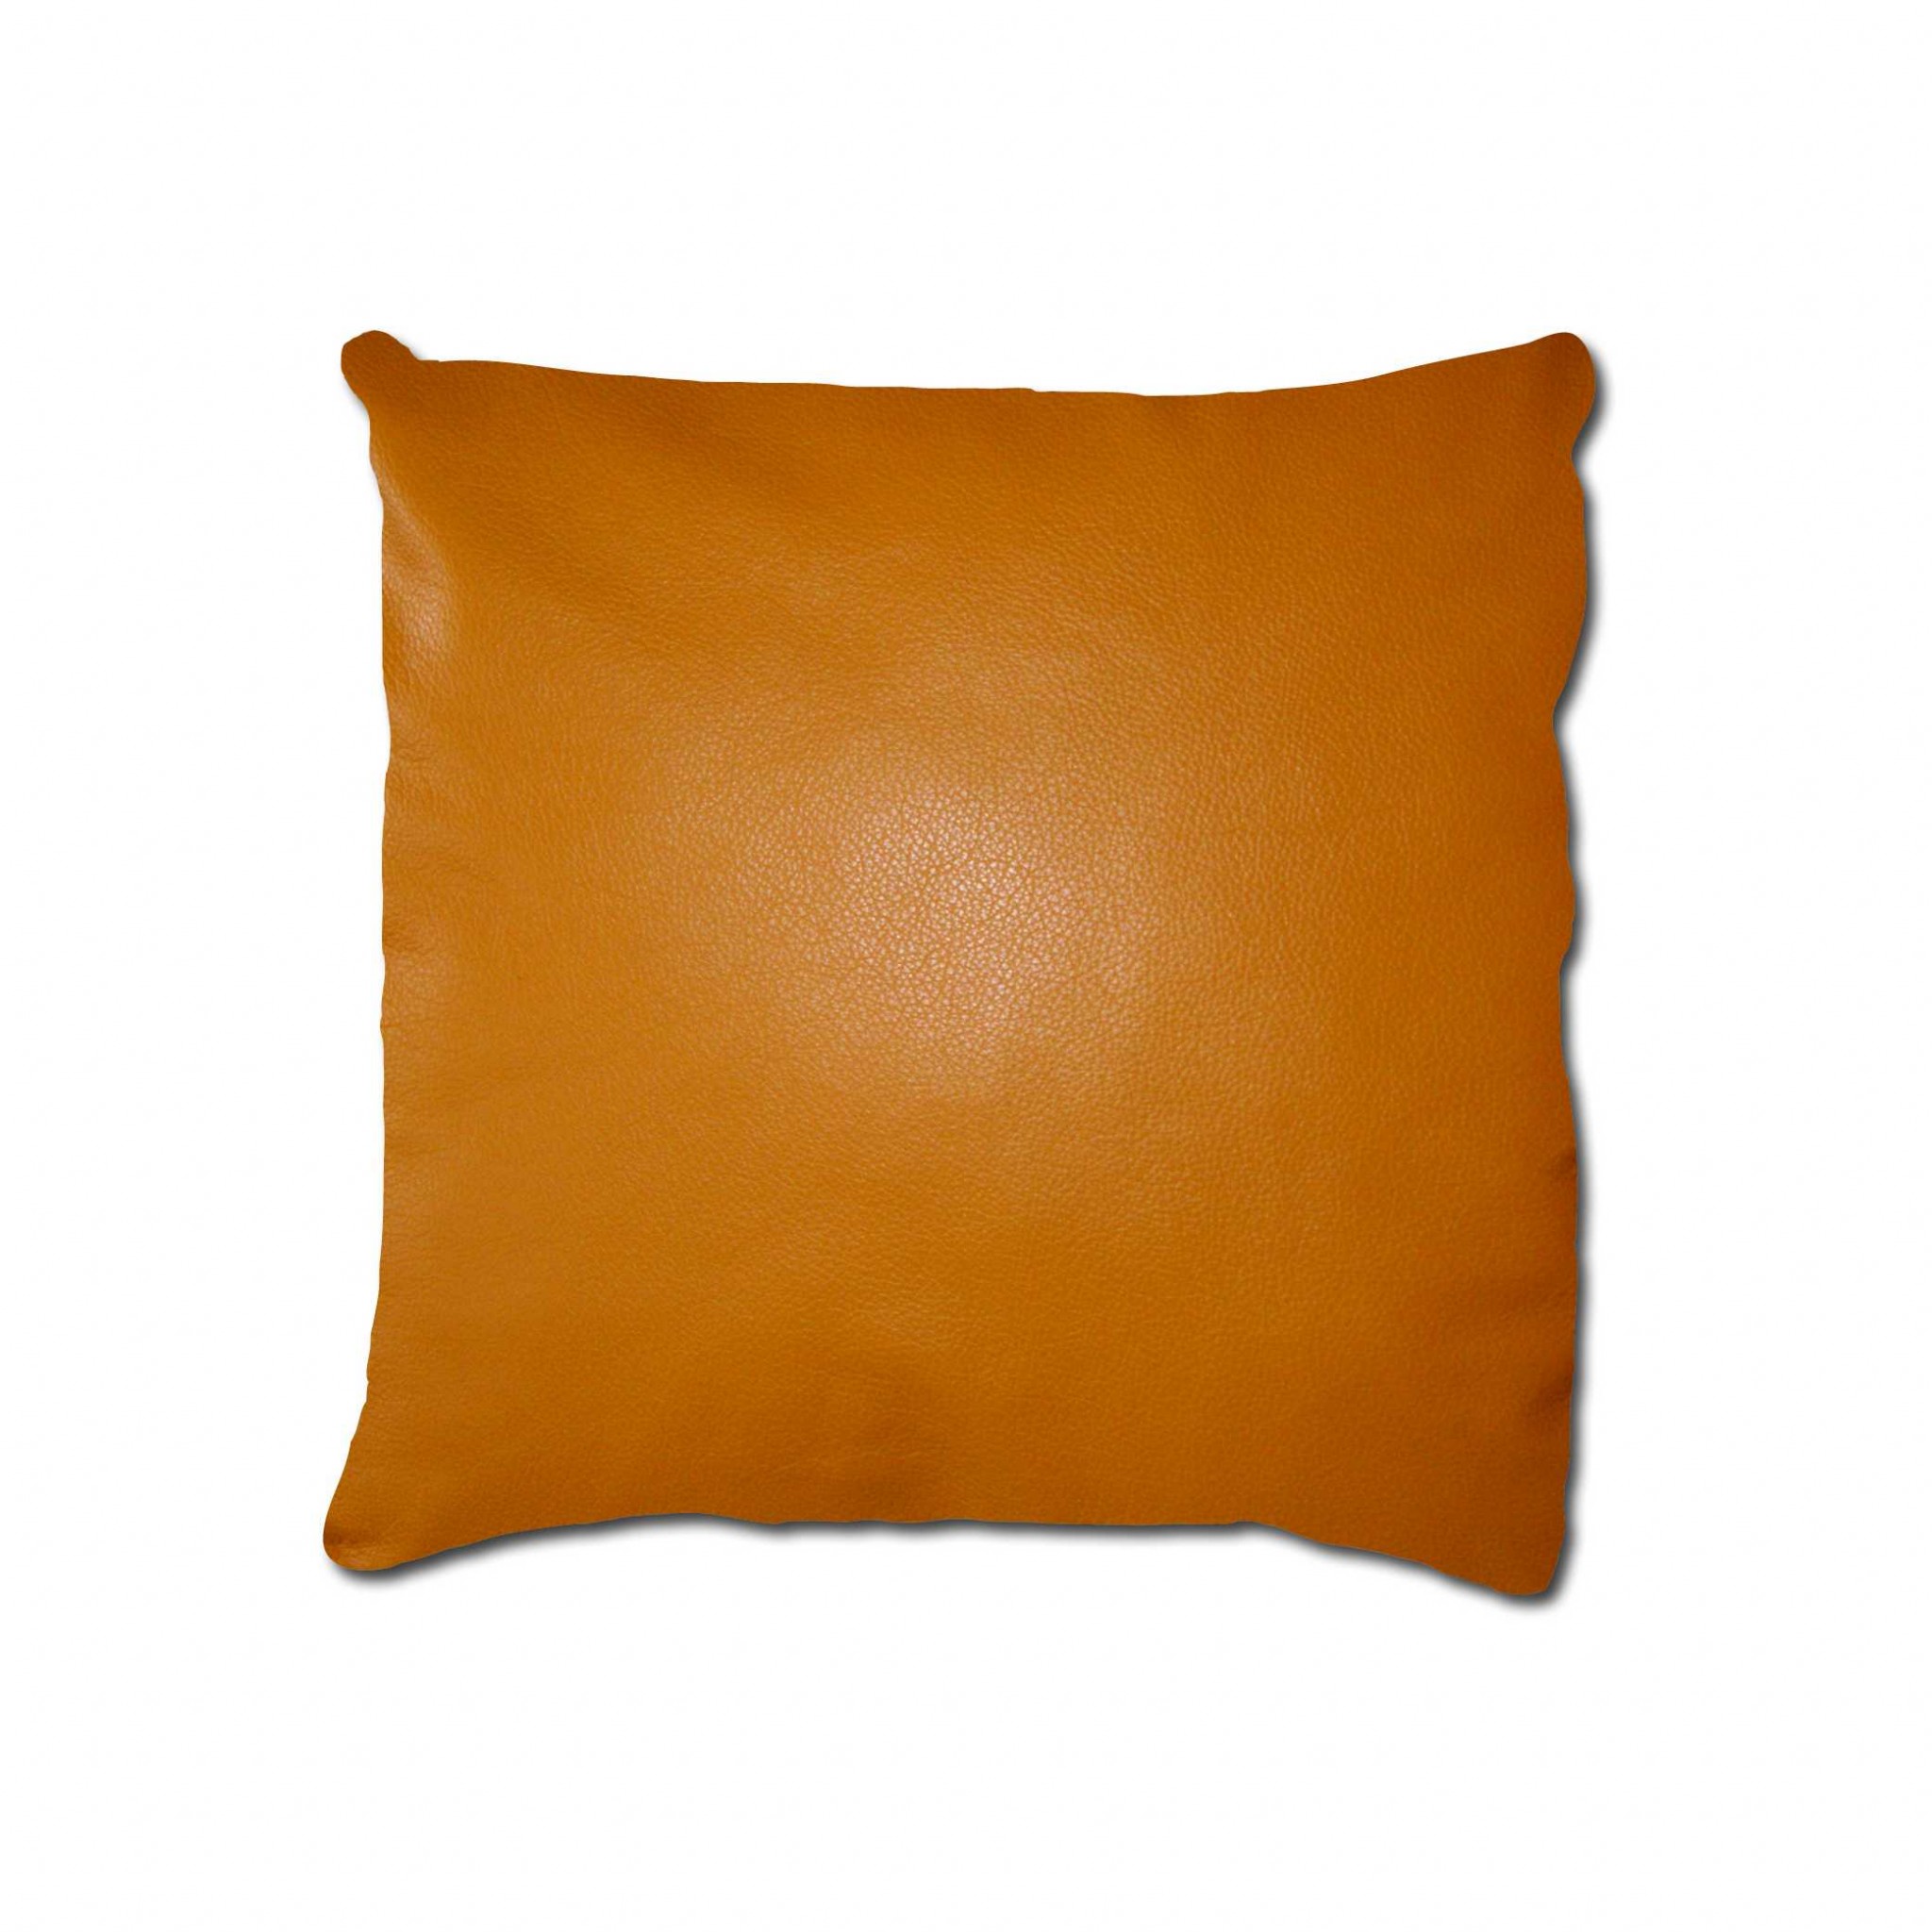 16" x 16" x 5" Mustard, Cowhide Leather - Pillow